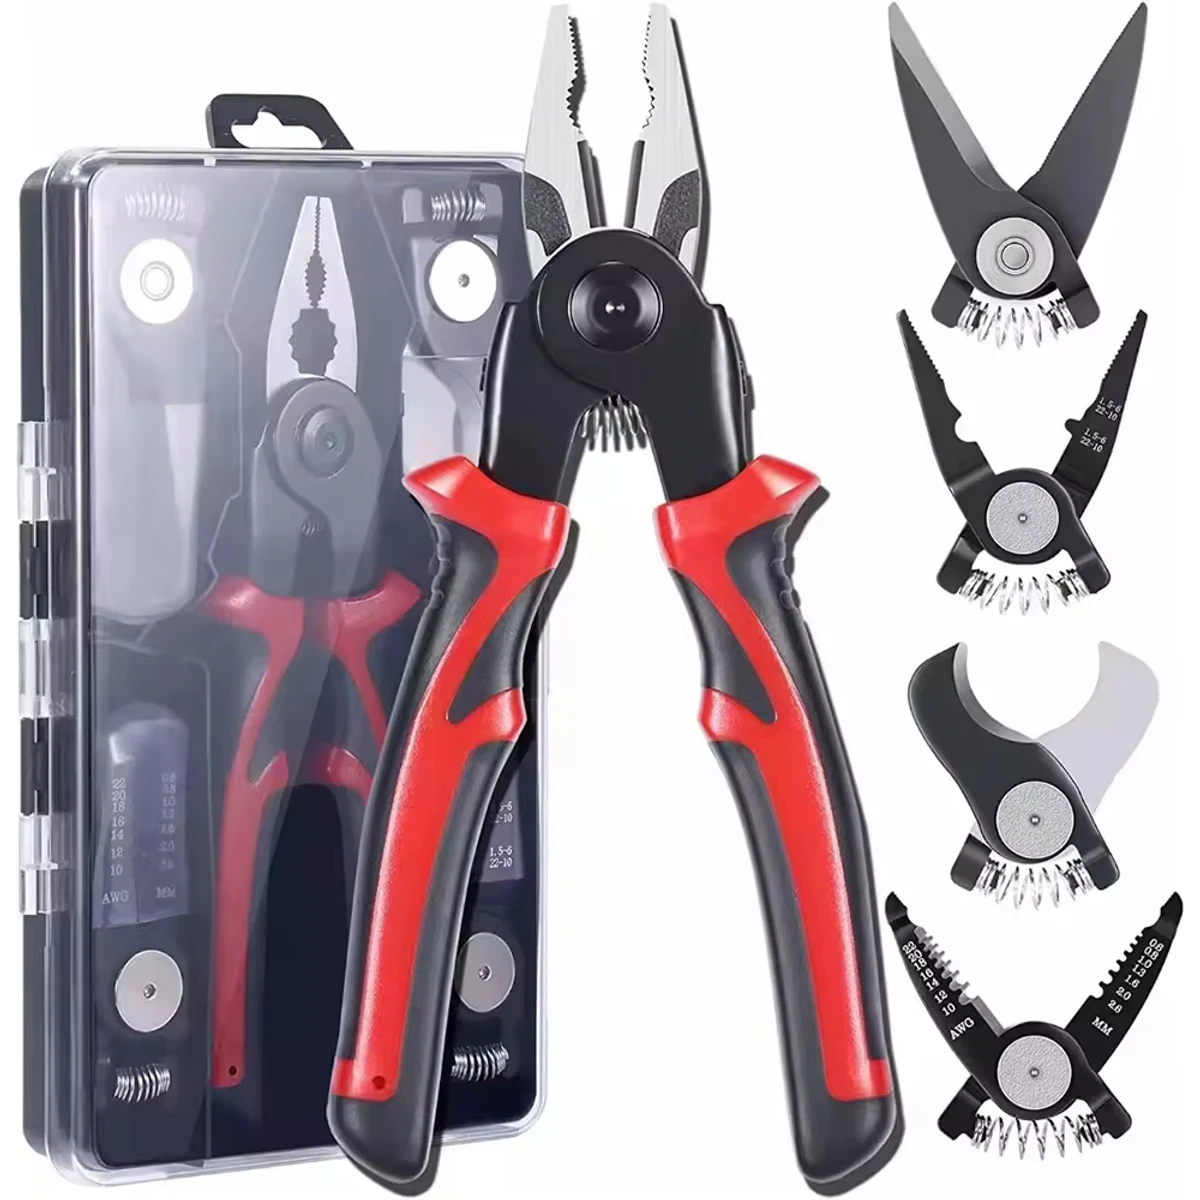 Fast Multifunctional 5 In 1 Replaceable Tools Set